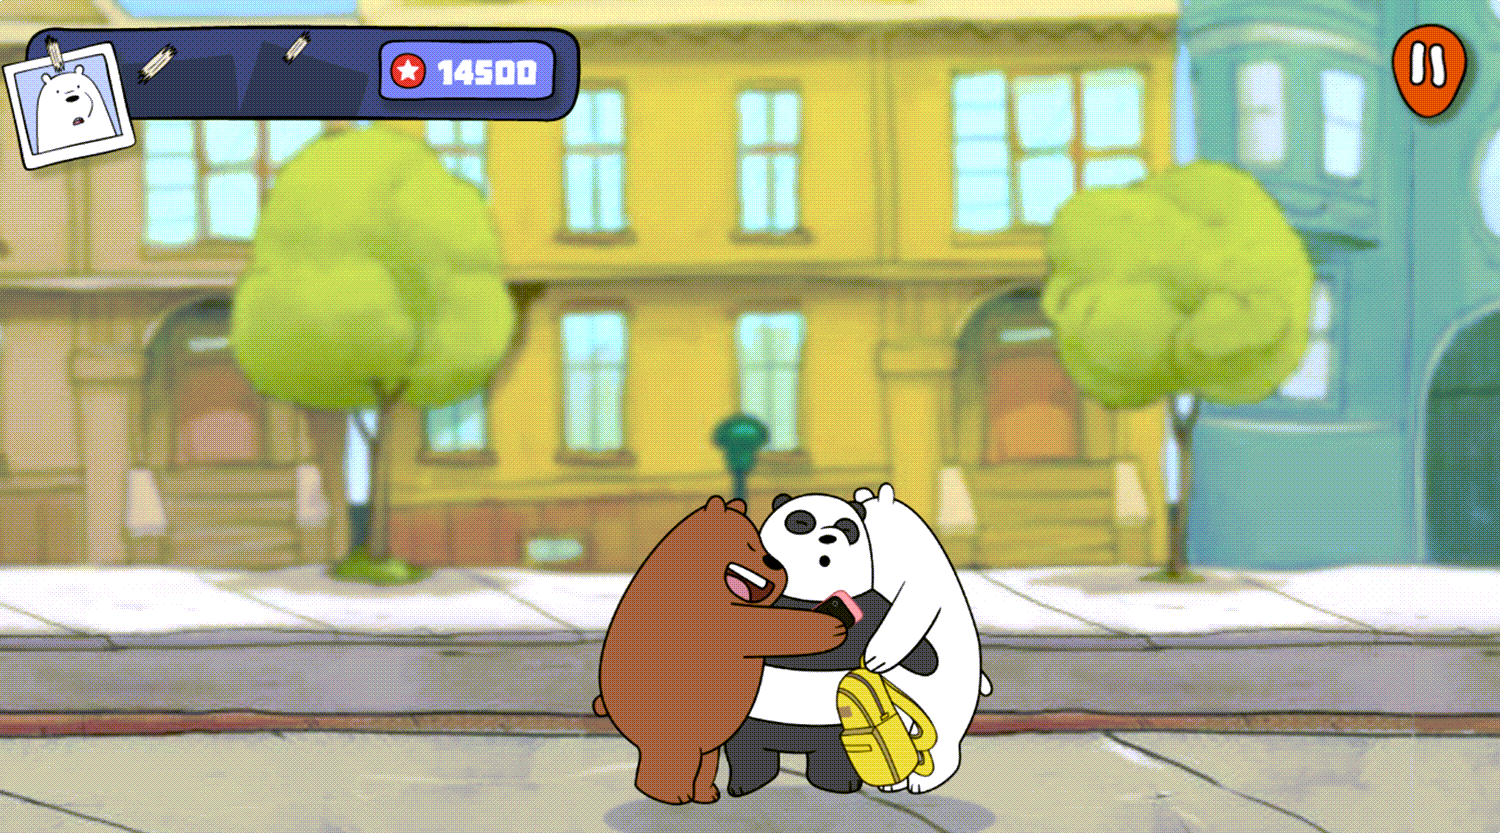 We Bare Bears Feathered Chase Game Beat Screenshot.